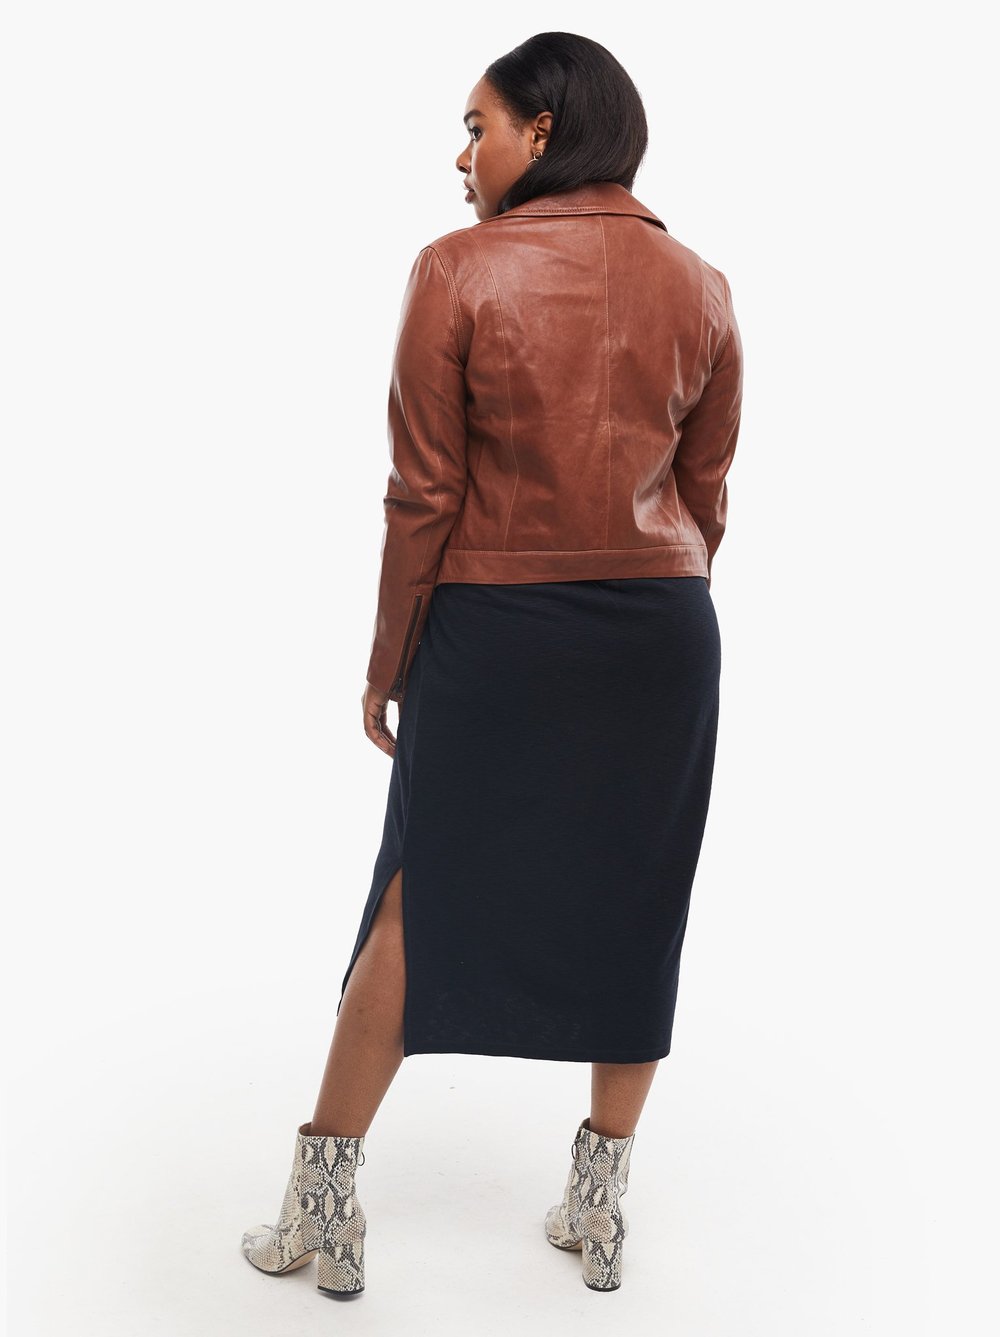 ABLE Maha Leather Jacket - Provisions Mercantile